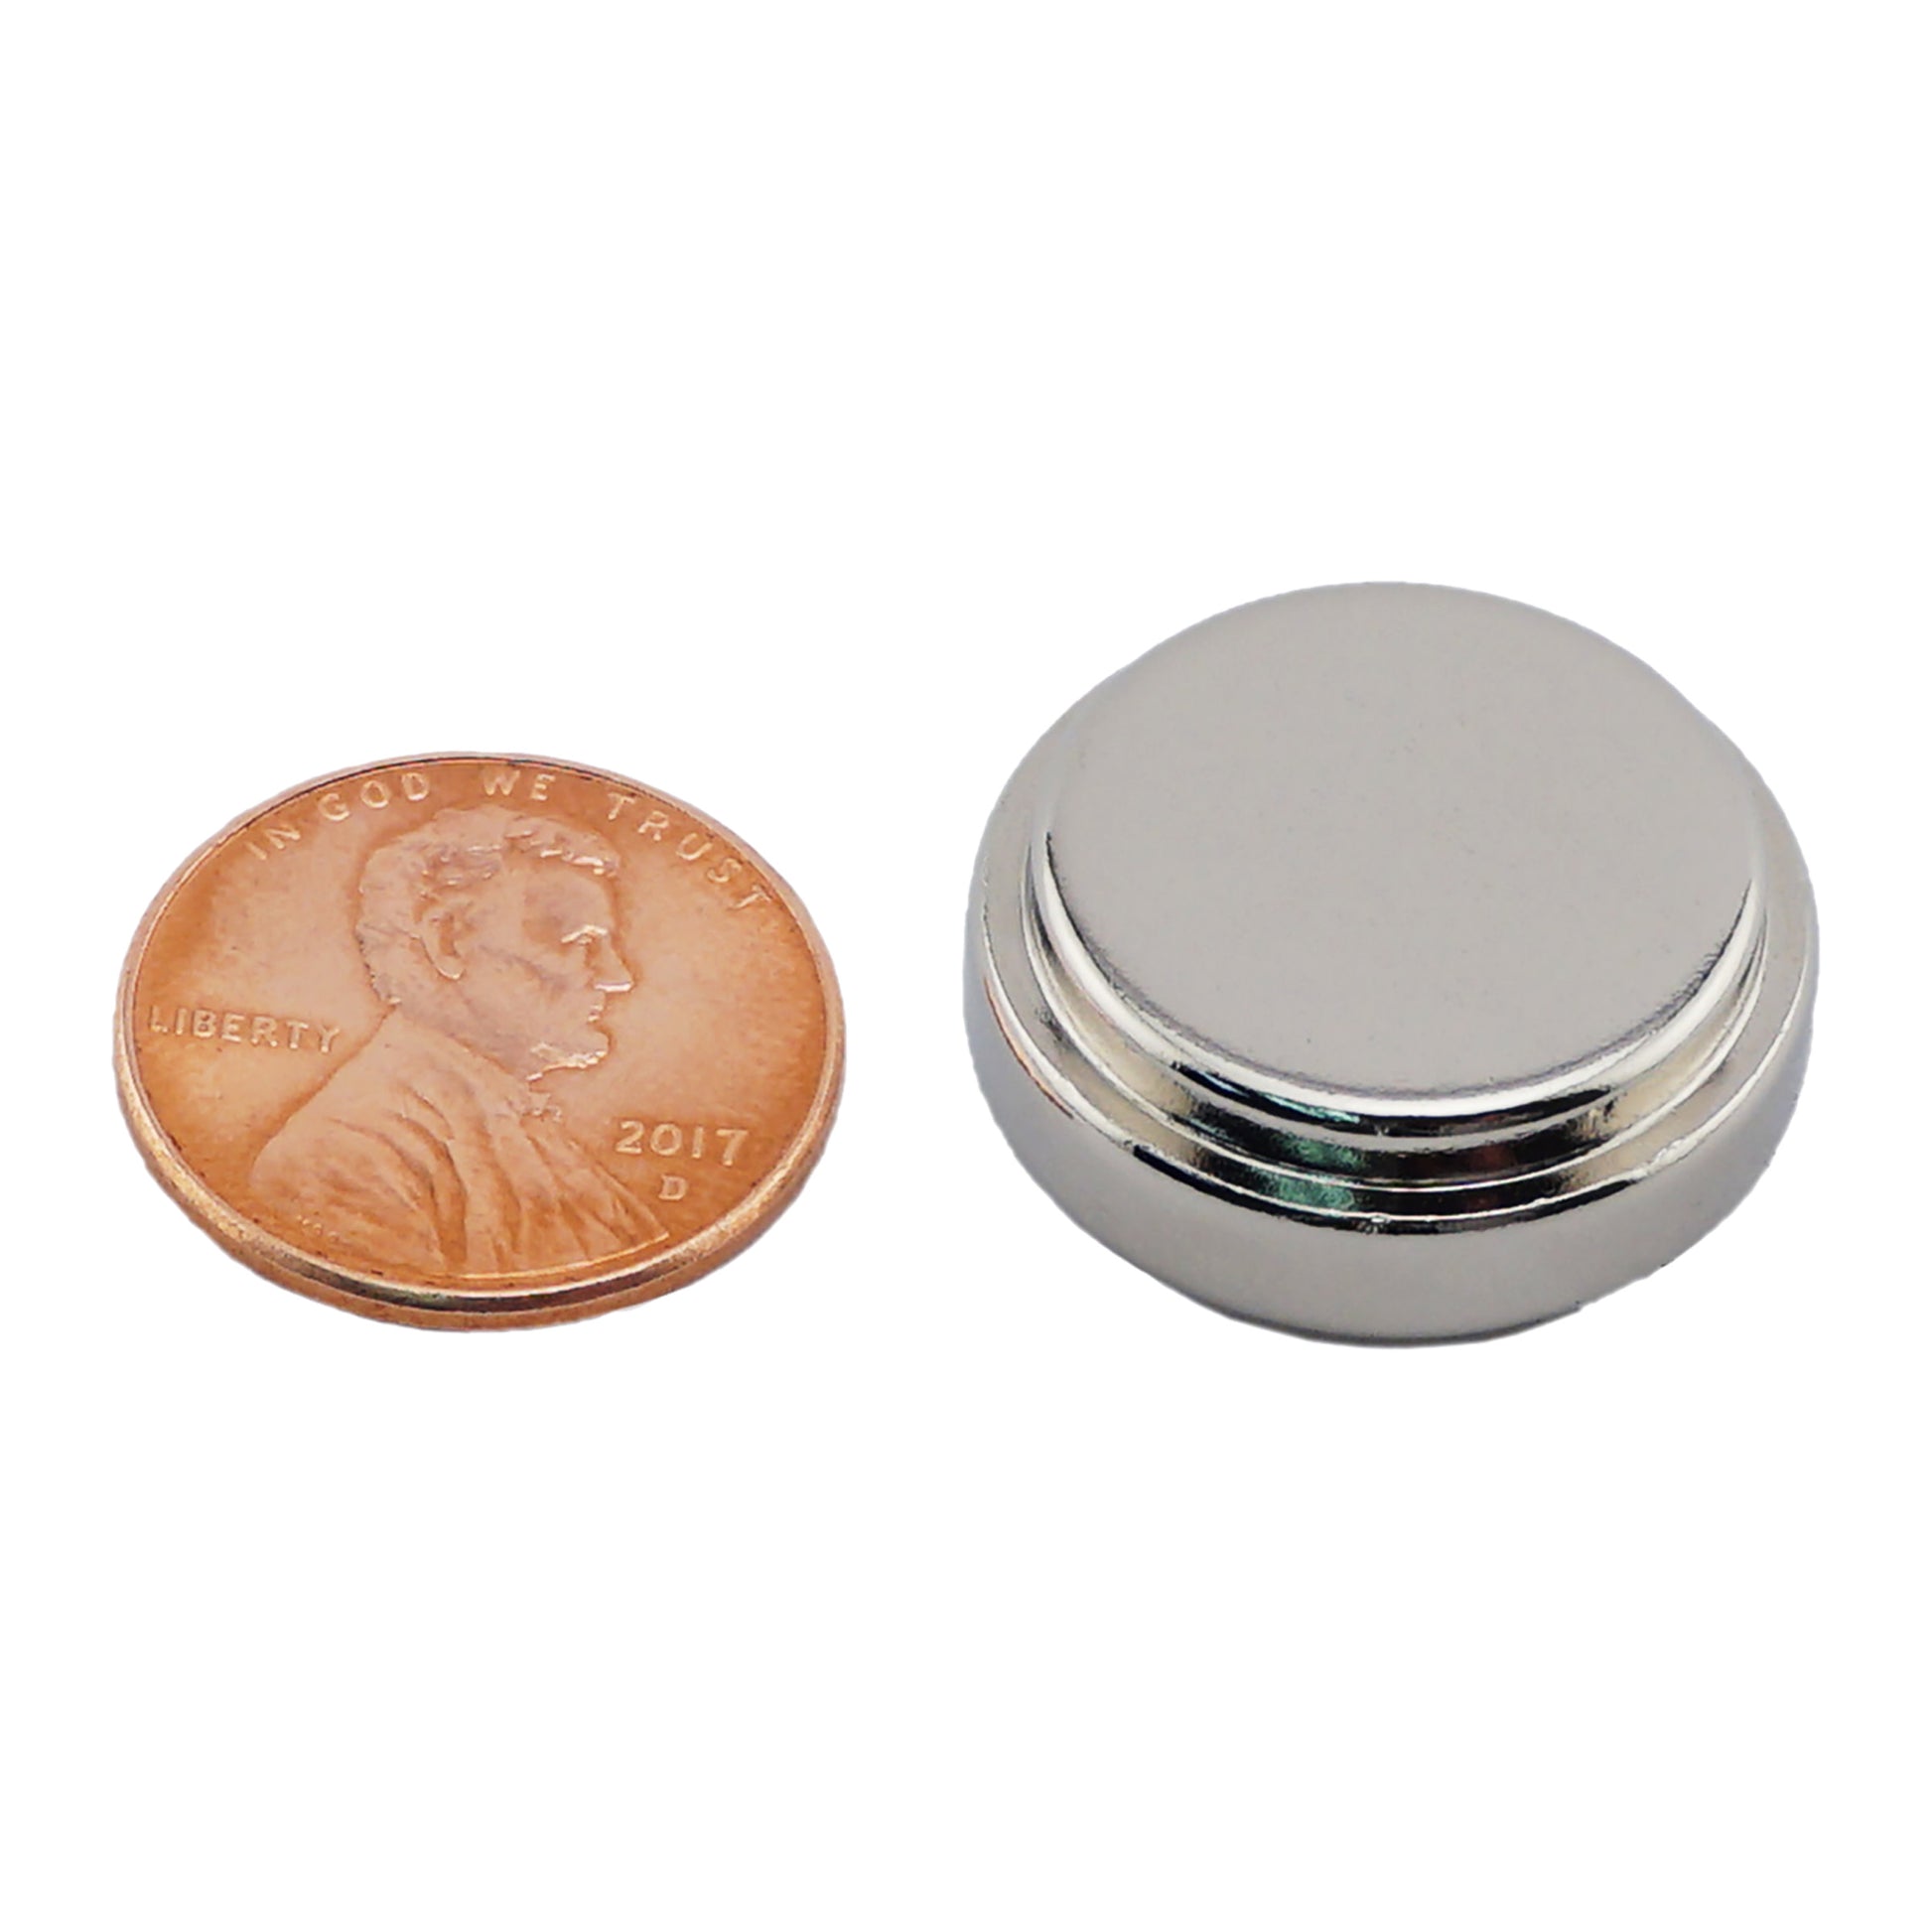 Load image into Gallery viewer, NDGO003700N Neodymium Disc Magnet - Compared to Penny for Size Reference